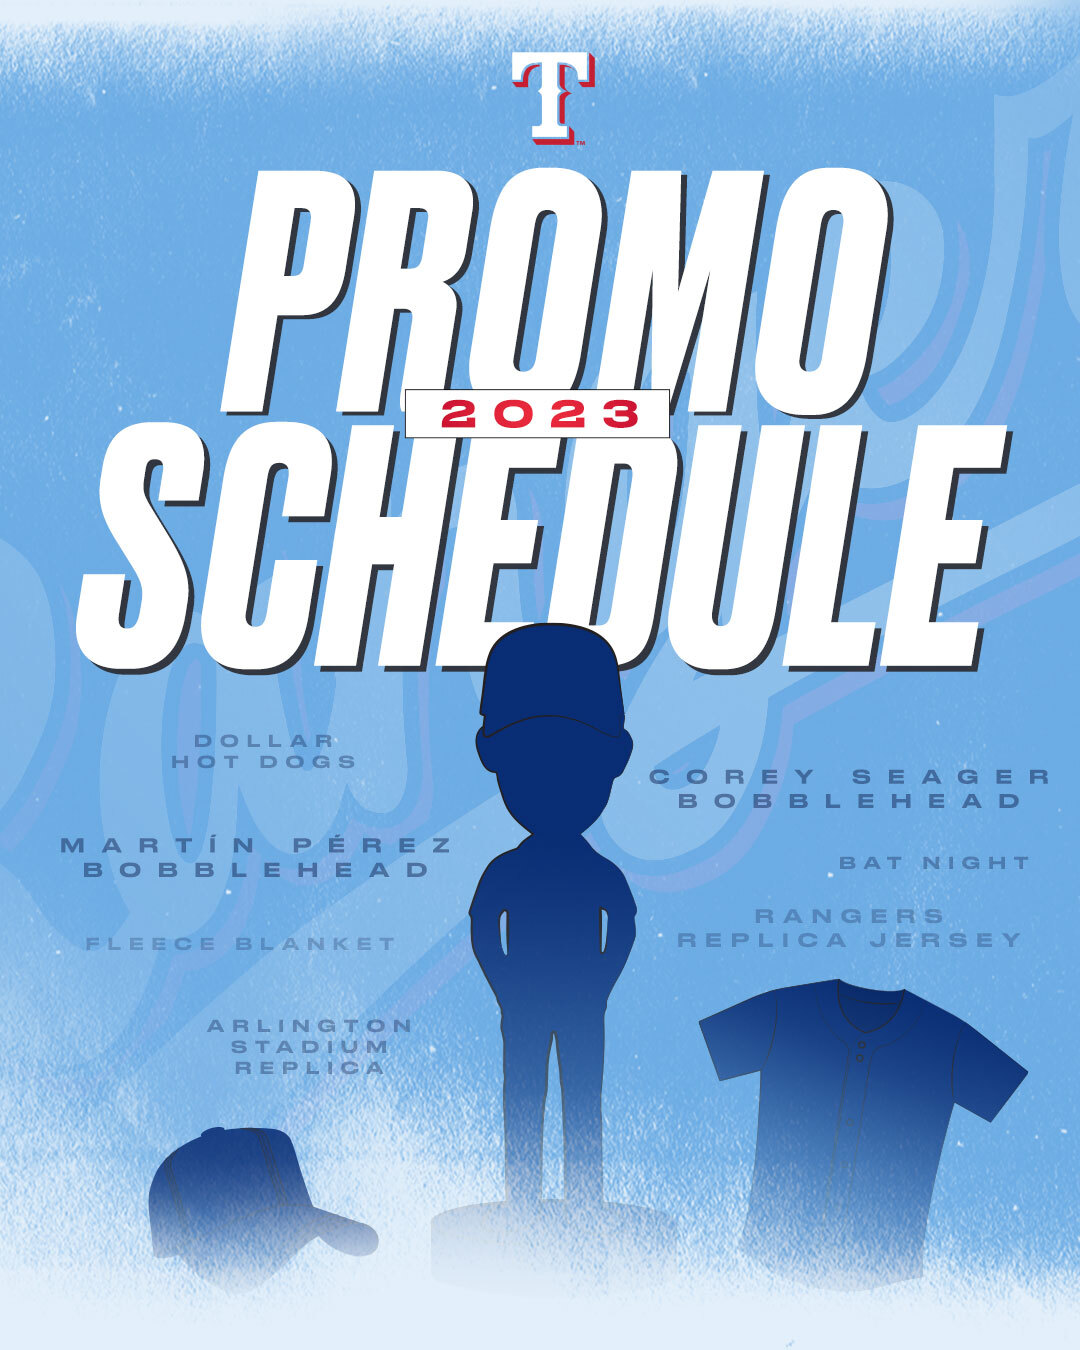 Rangers 2023 promo schedule is now available! Anything that stands